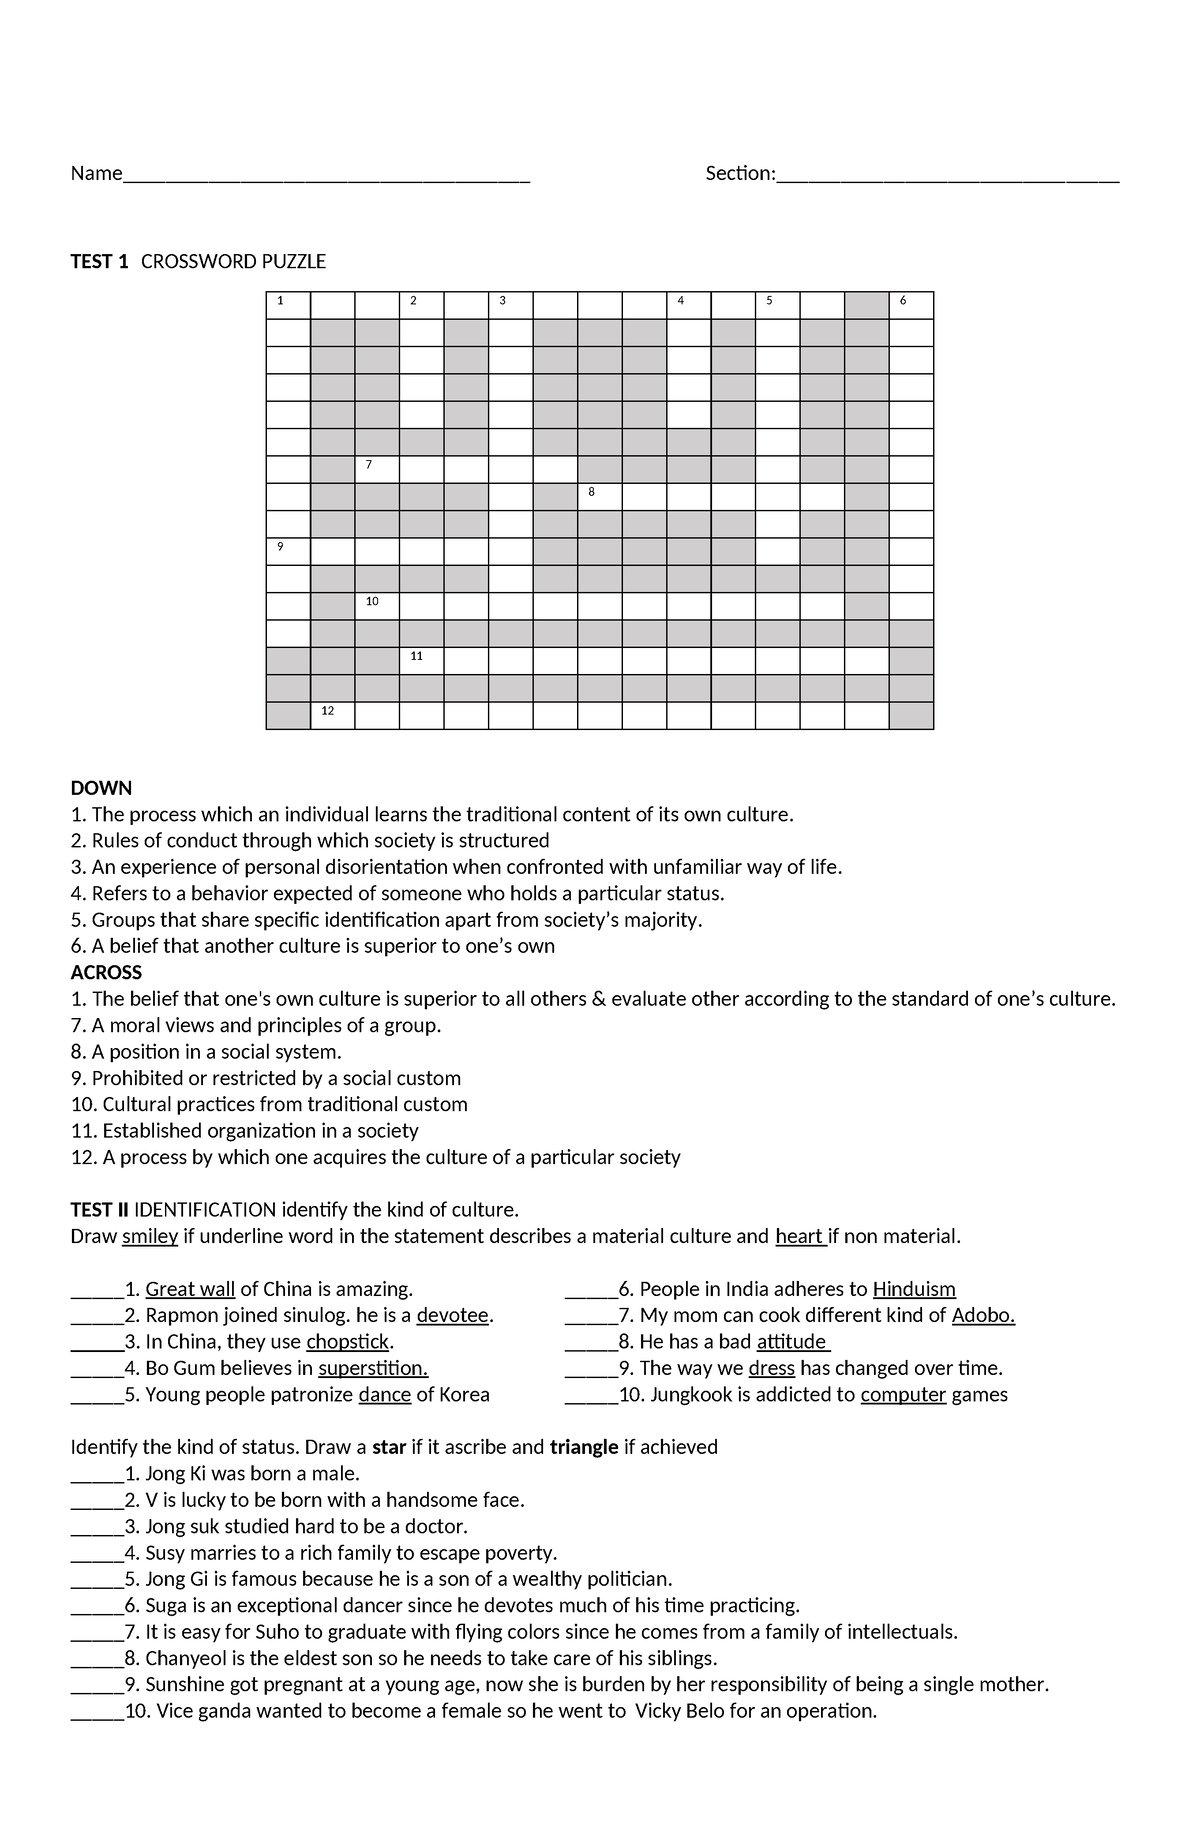 Worksheet 1 EDUC 9 - practice activities for students - Name